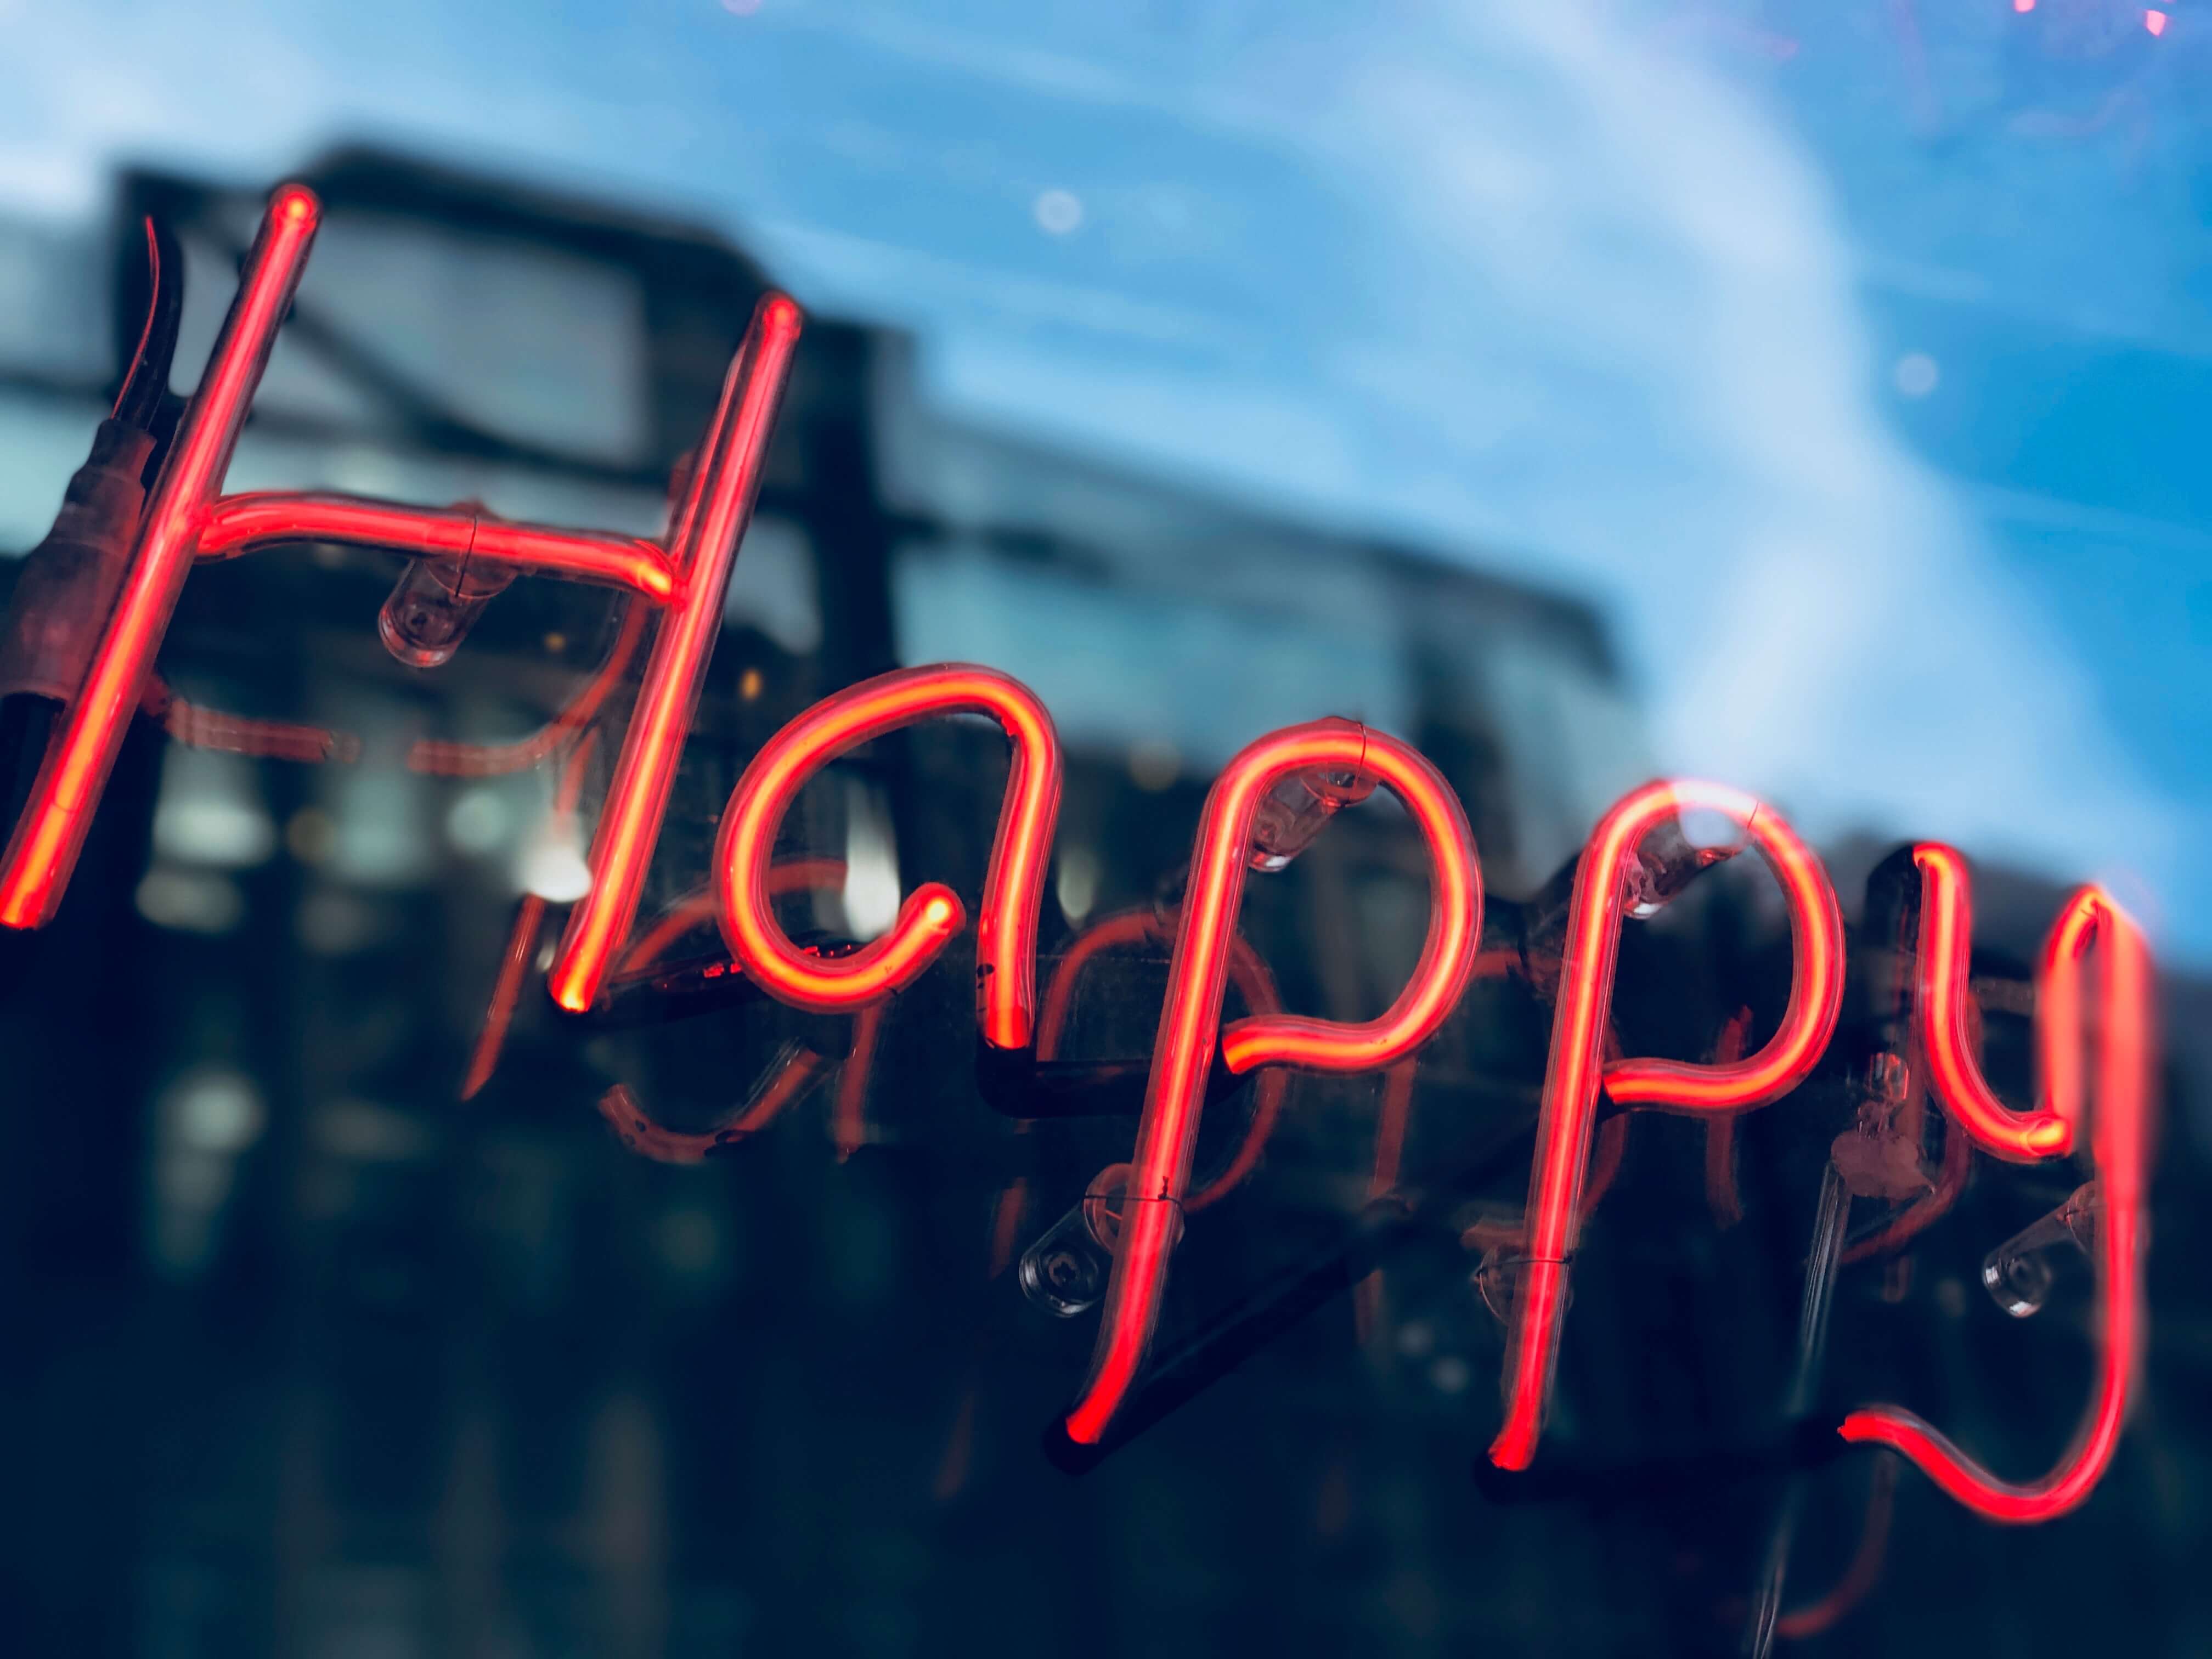 A neon sign saying happy